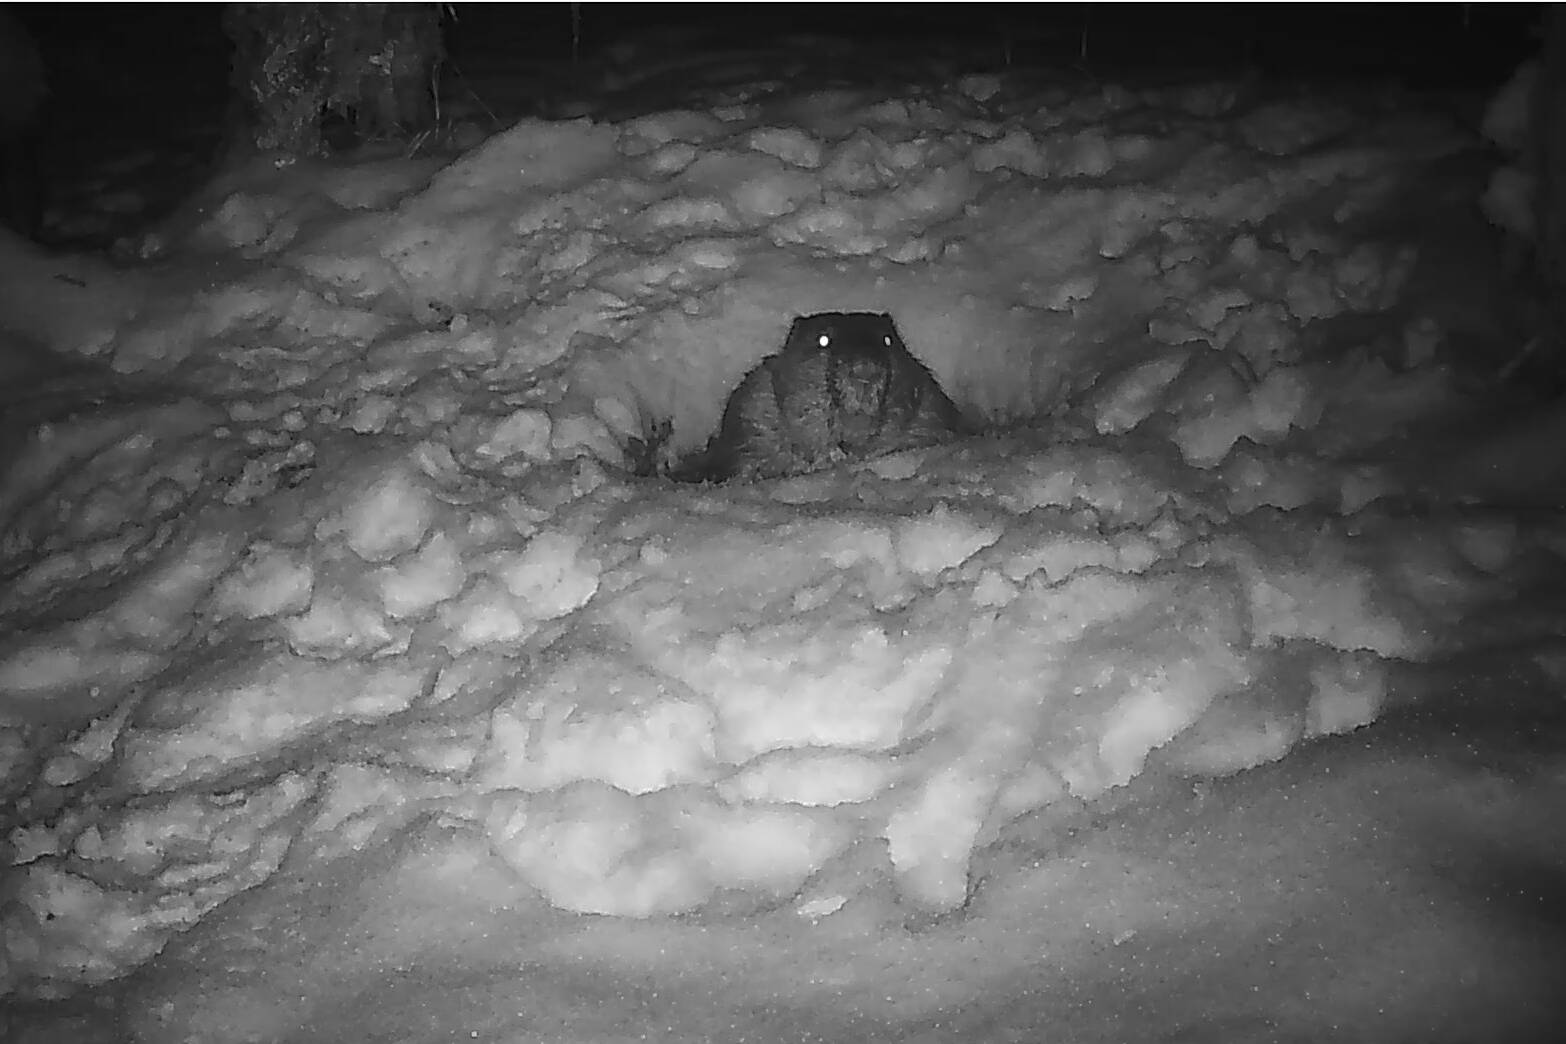 A trail cam photo shows a beaver emerging from its snowy lodge and went foraging for branches in December (Courtesy Photo / Jos Bakker)